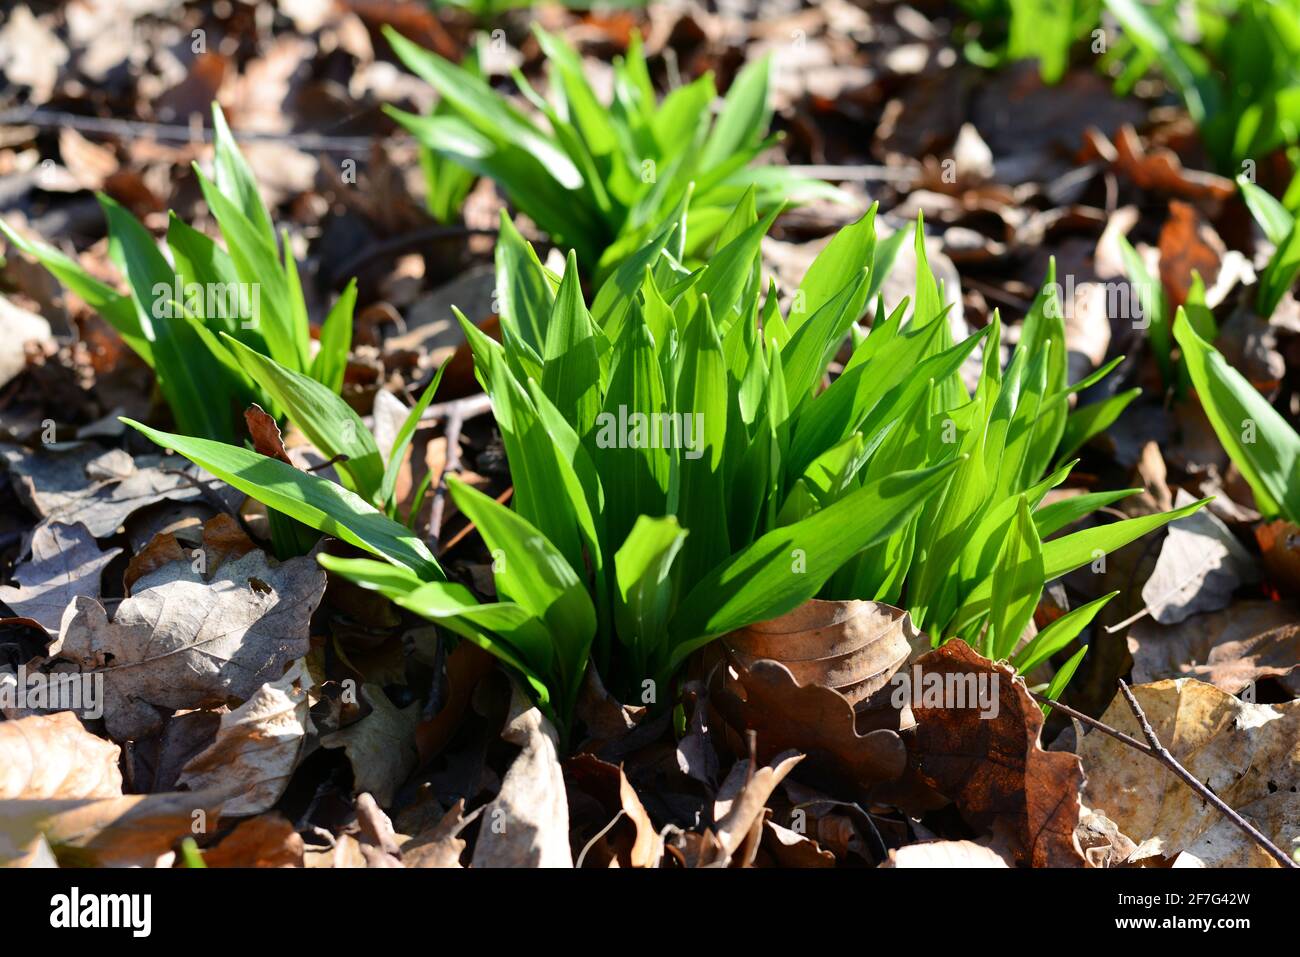 Wild garlic plants in a forest. Close-up Stock Photo